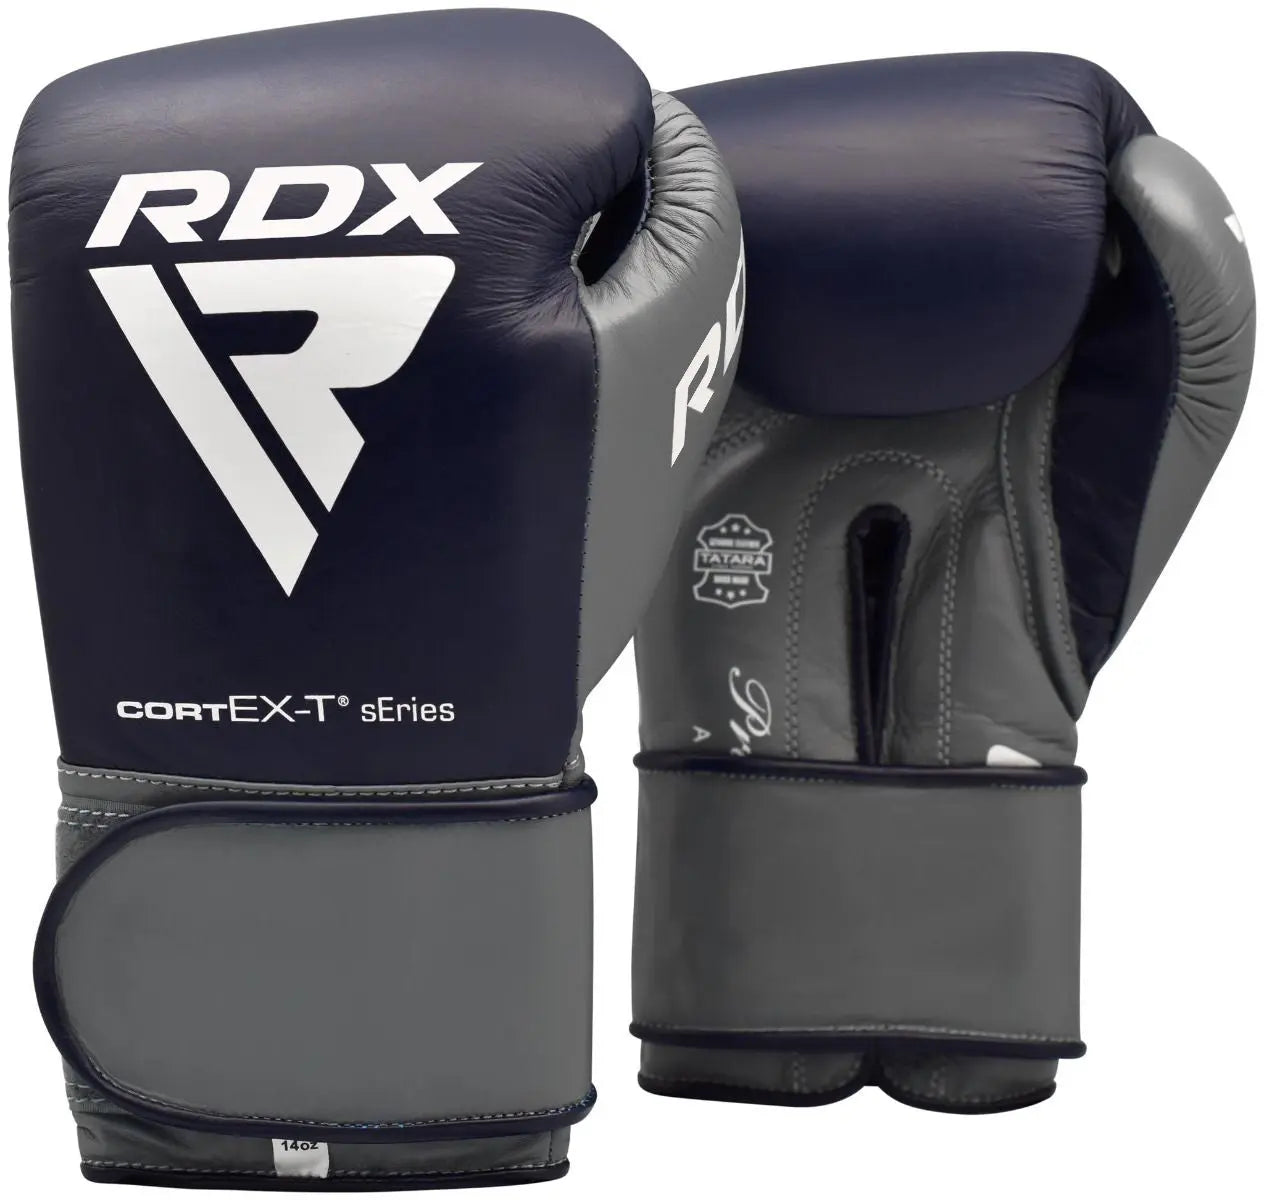 RDX C4 Fight Boxing Sparring Gloves - Prime combats RDX Sports 16oz 